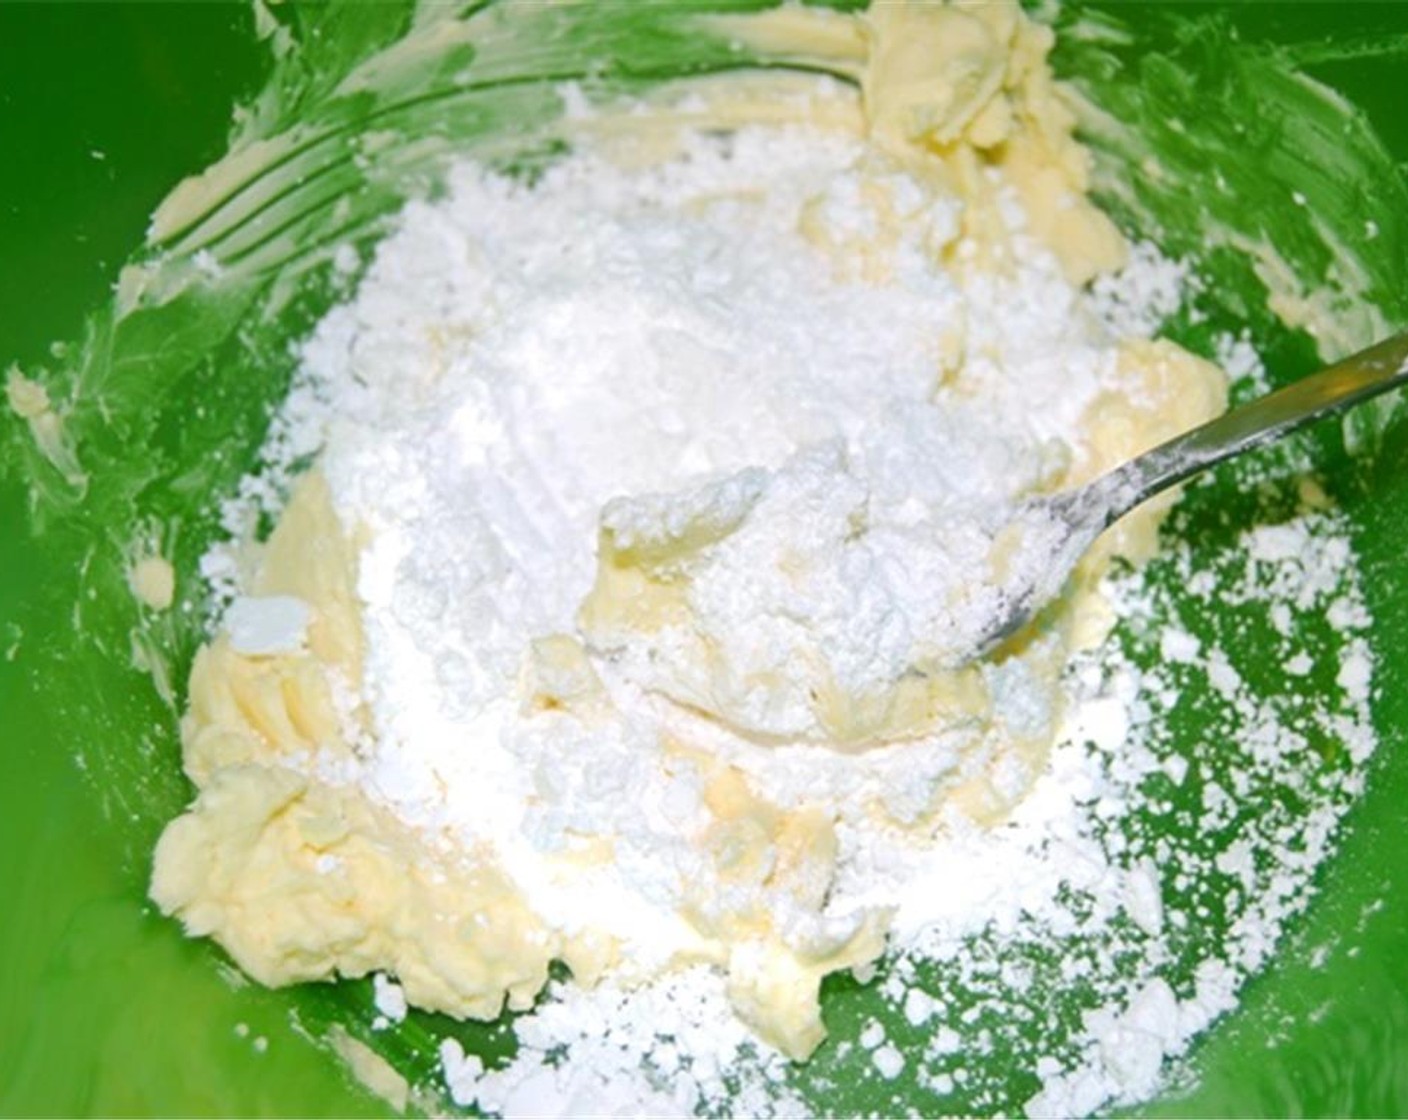 step 2 Add the Powdered Confectioners Sugar (1/2 cup) and Vanilla Extract (1 tsp) and beat until smooth, about 2 minutes.